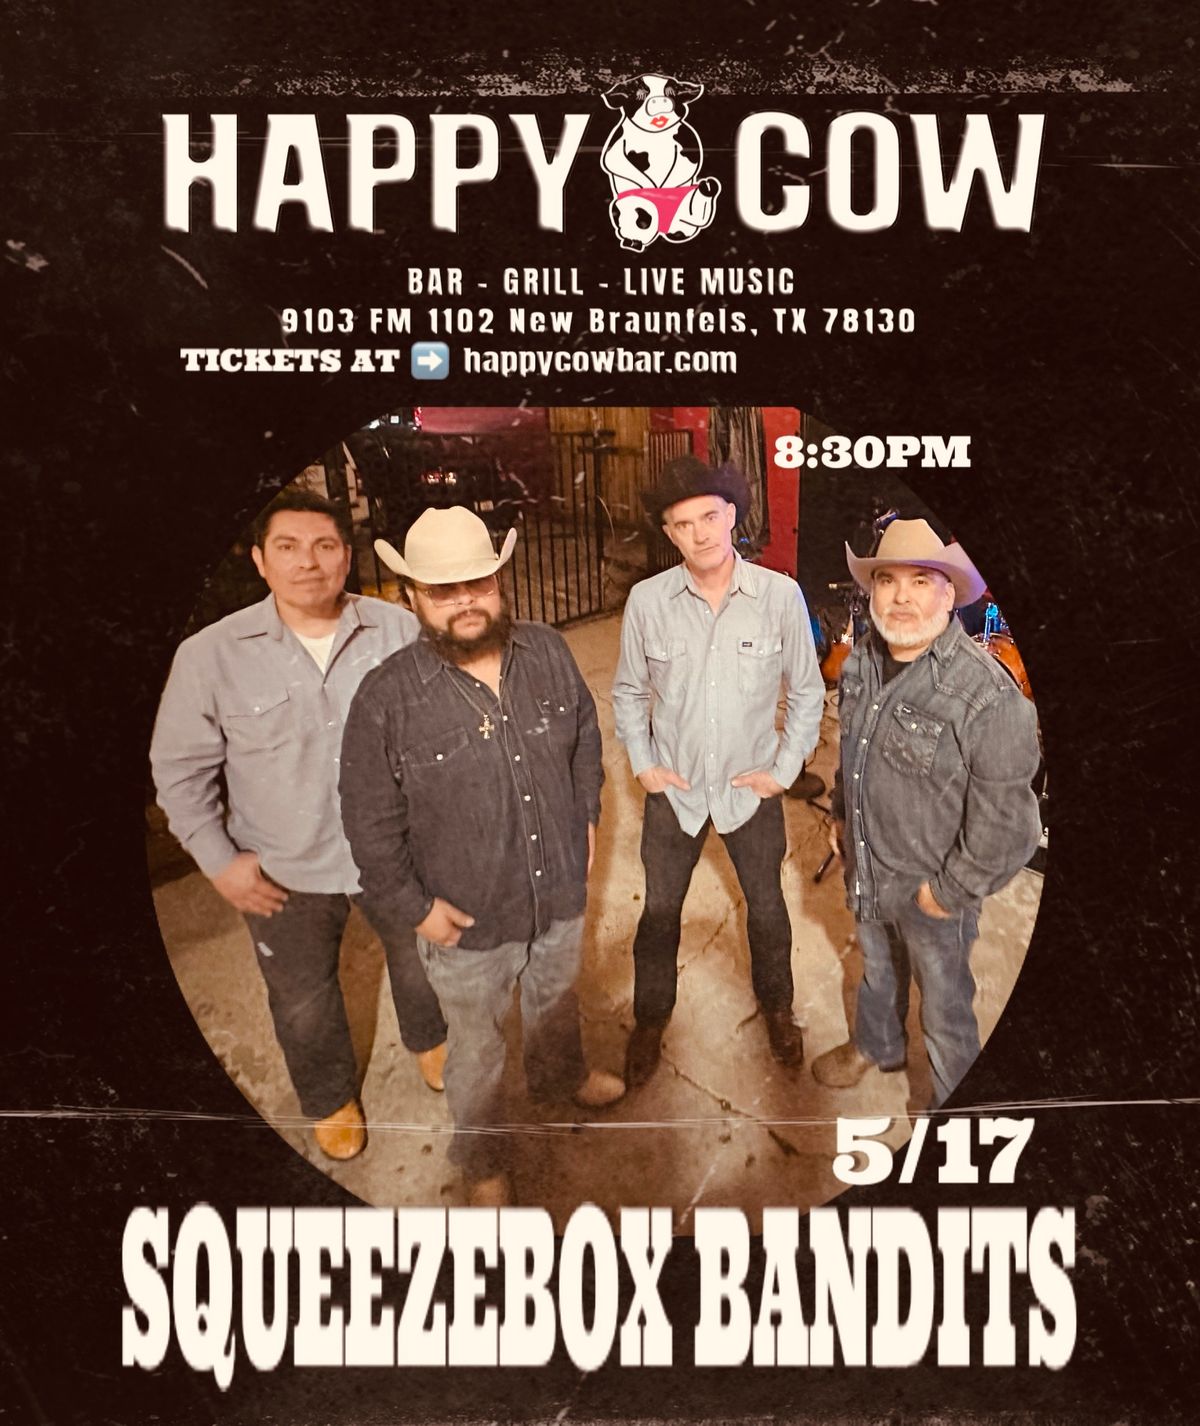 Squeezebox Bandits Live At Happy Cow